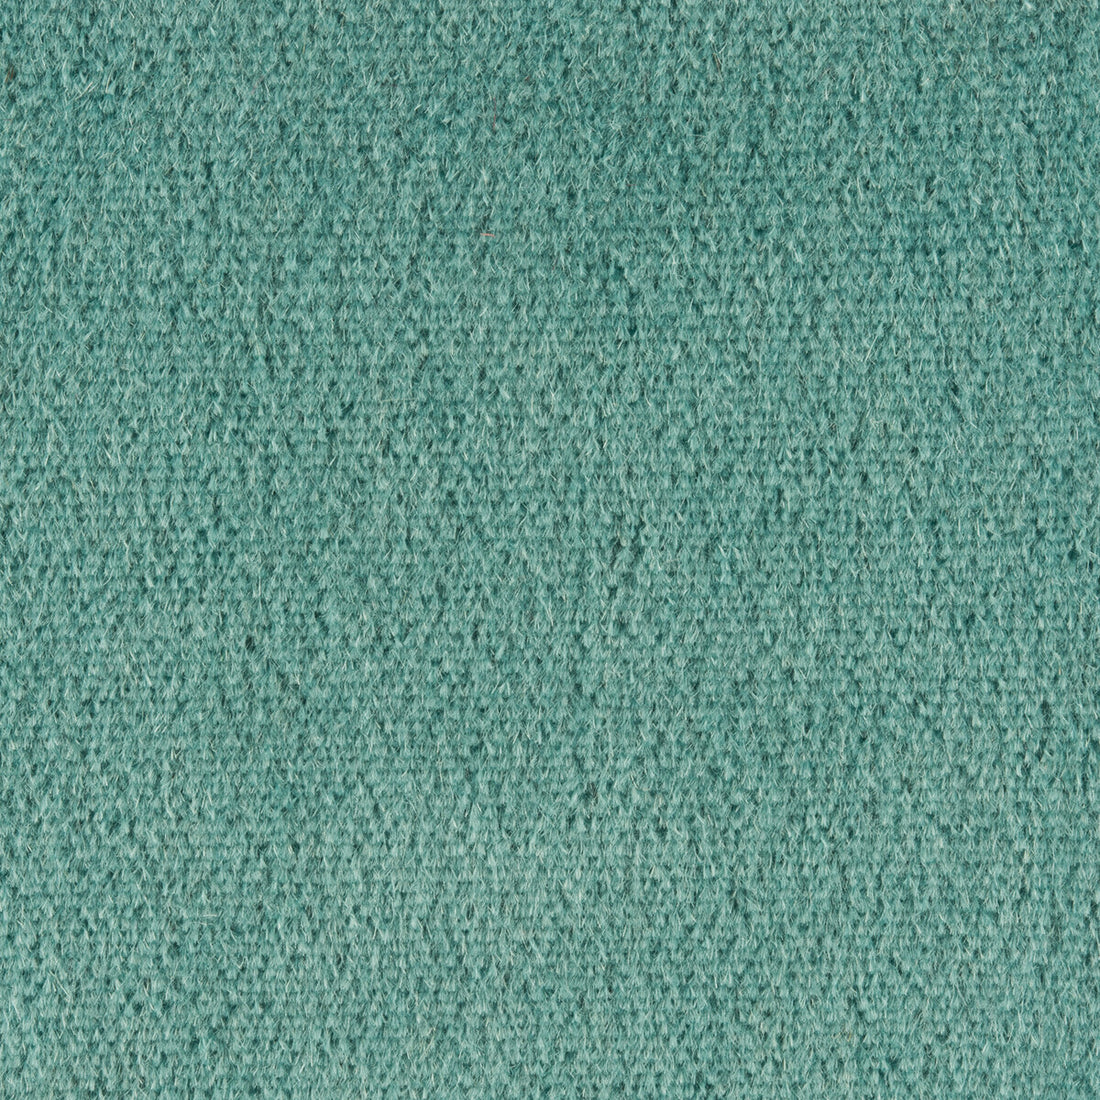 Plazzo Mohair fabric in reef color - pattern 34259.249.0 - by Kravet Couture